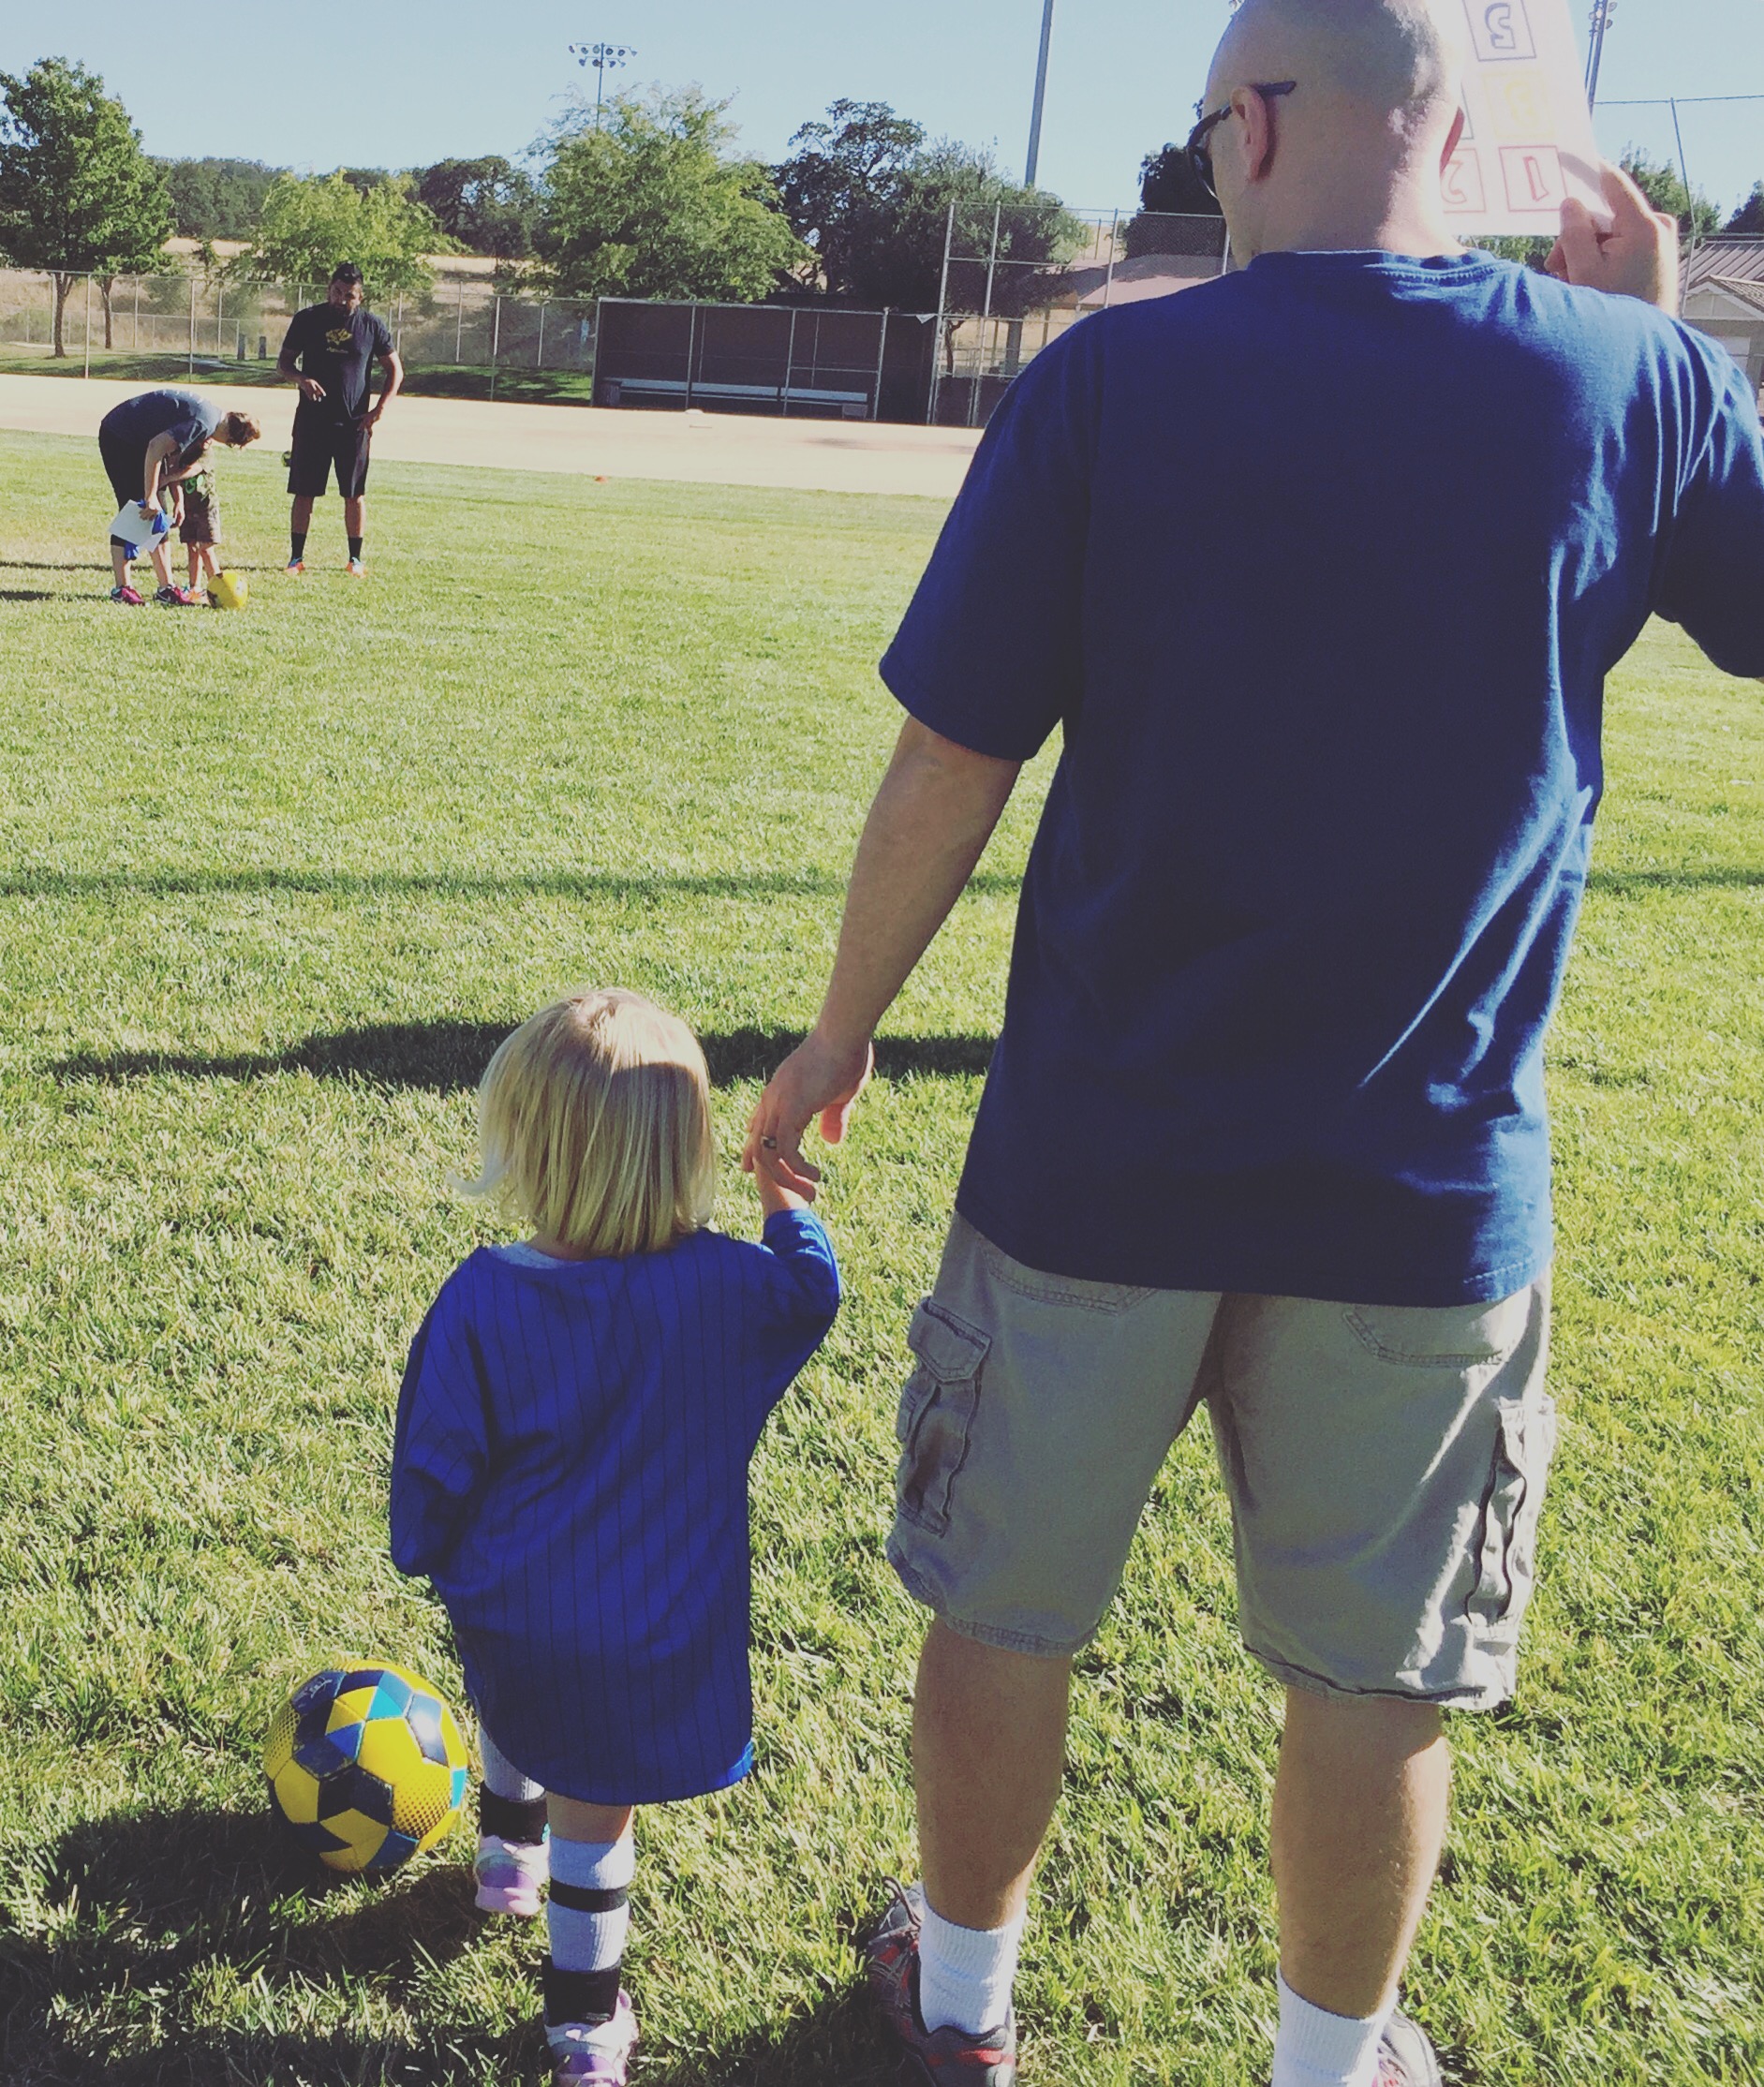 Daddy and Daughter at Kidz Love Soccer class in Paso Robles California as blogged about on Two In Tow & On The Go.